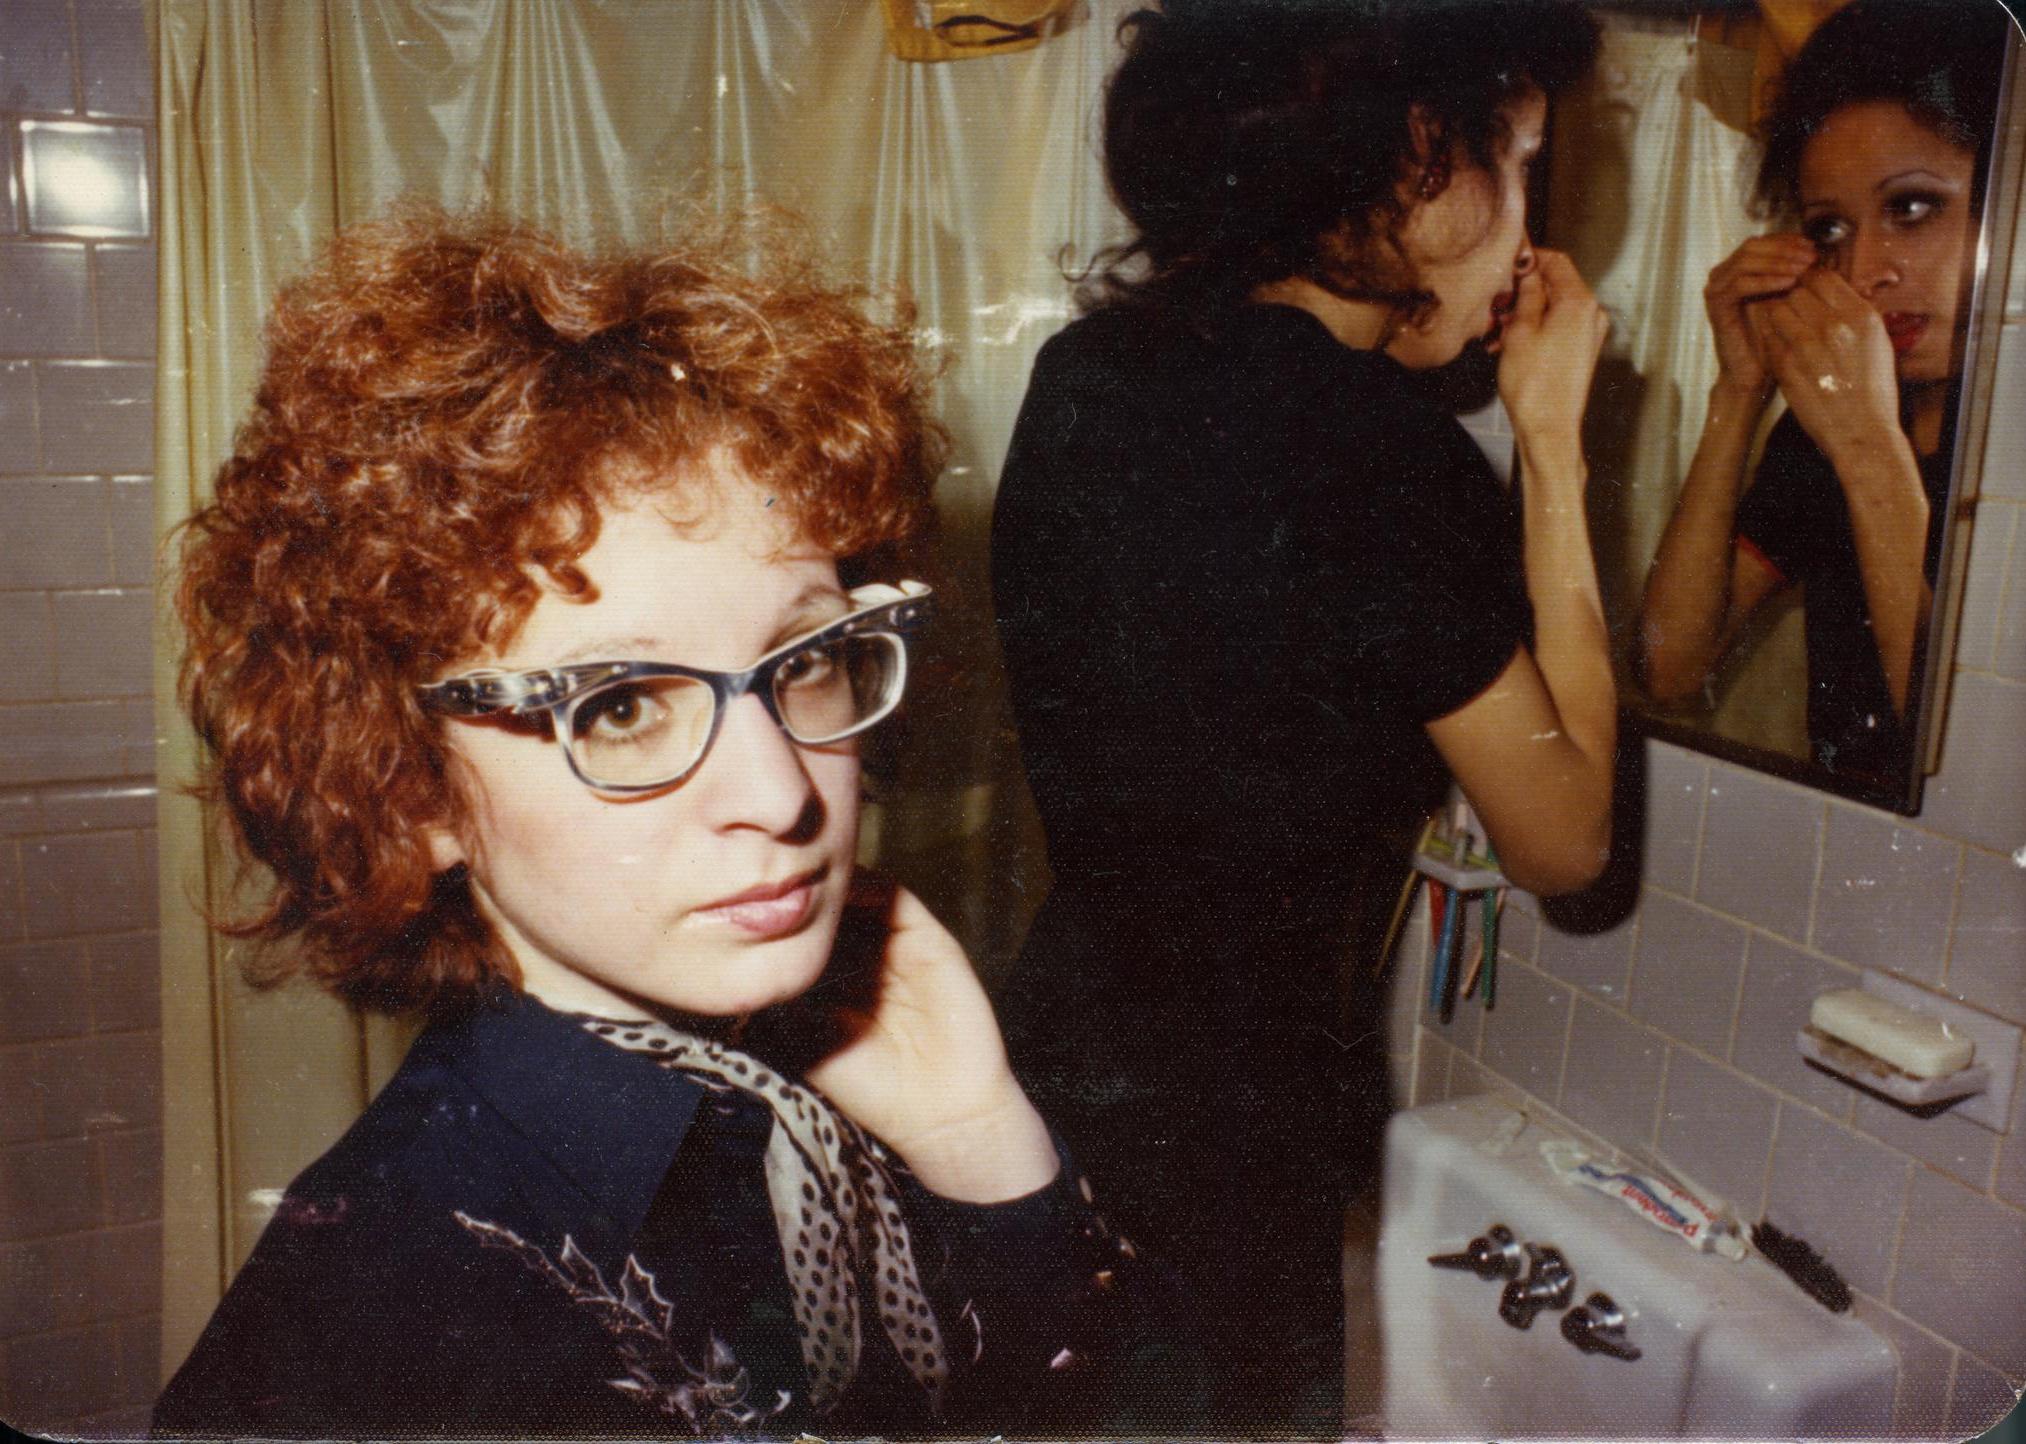 Two women in front of a bathroom mirror.